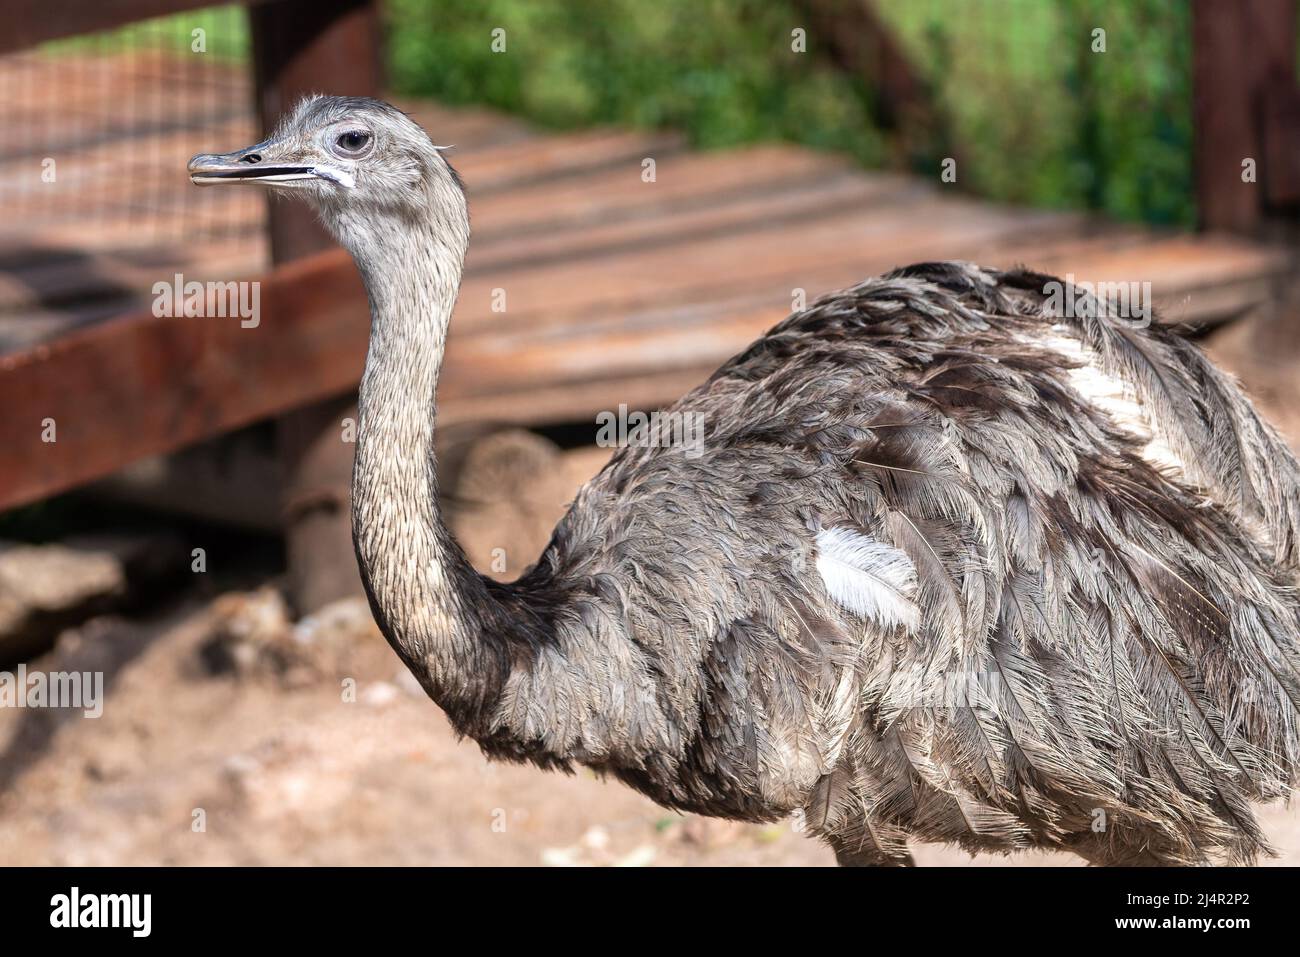 The "Ñandú" common rhea or pampas choique (Rhea americana) is a species of bird of the Rheidae family. It is found exclusively in South America. Altho Stock Photo